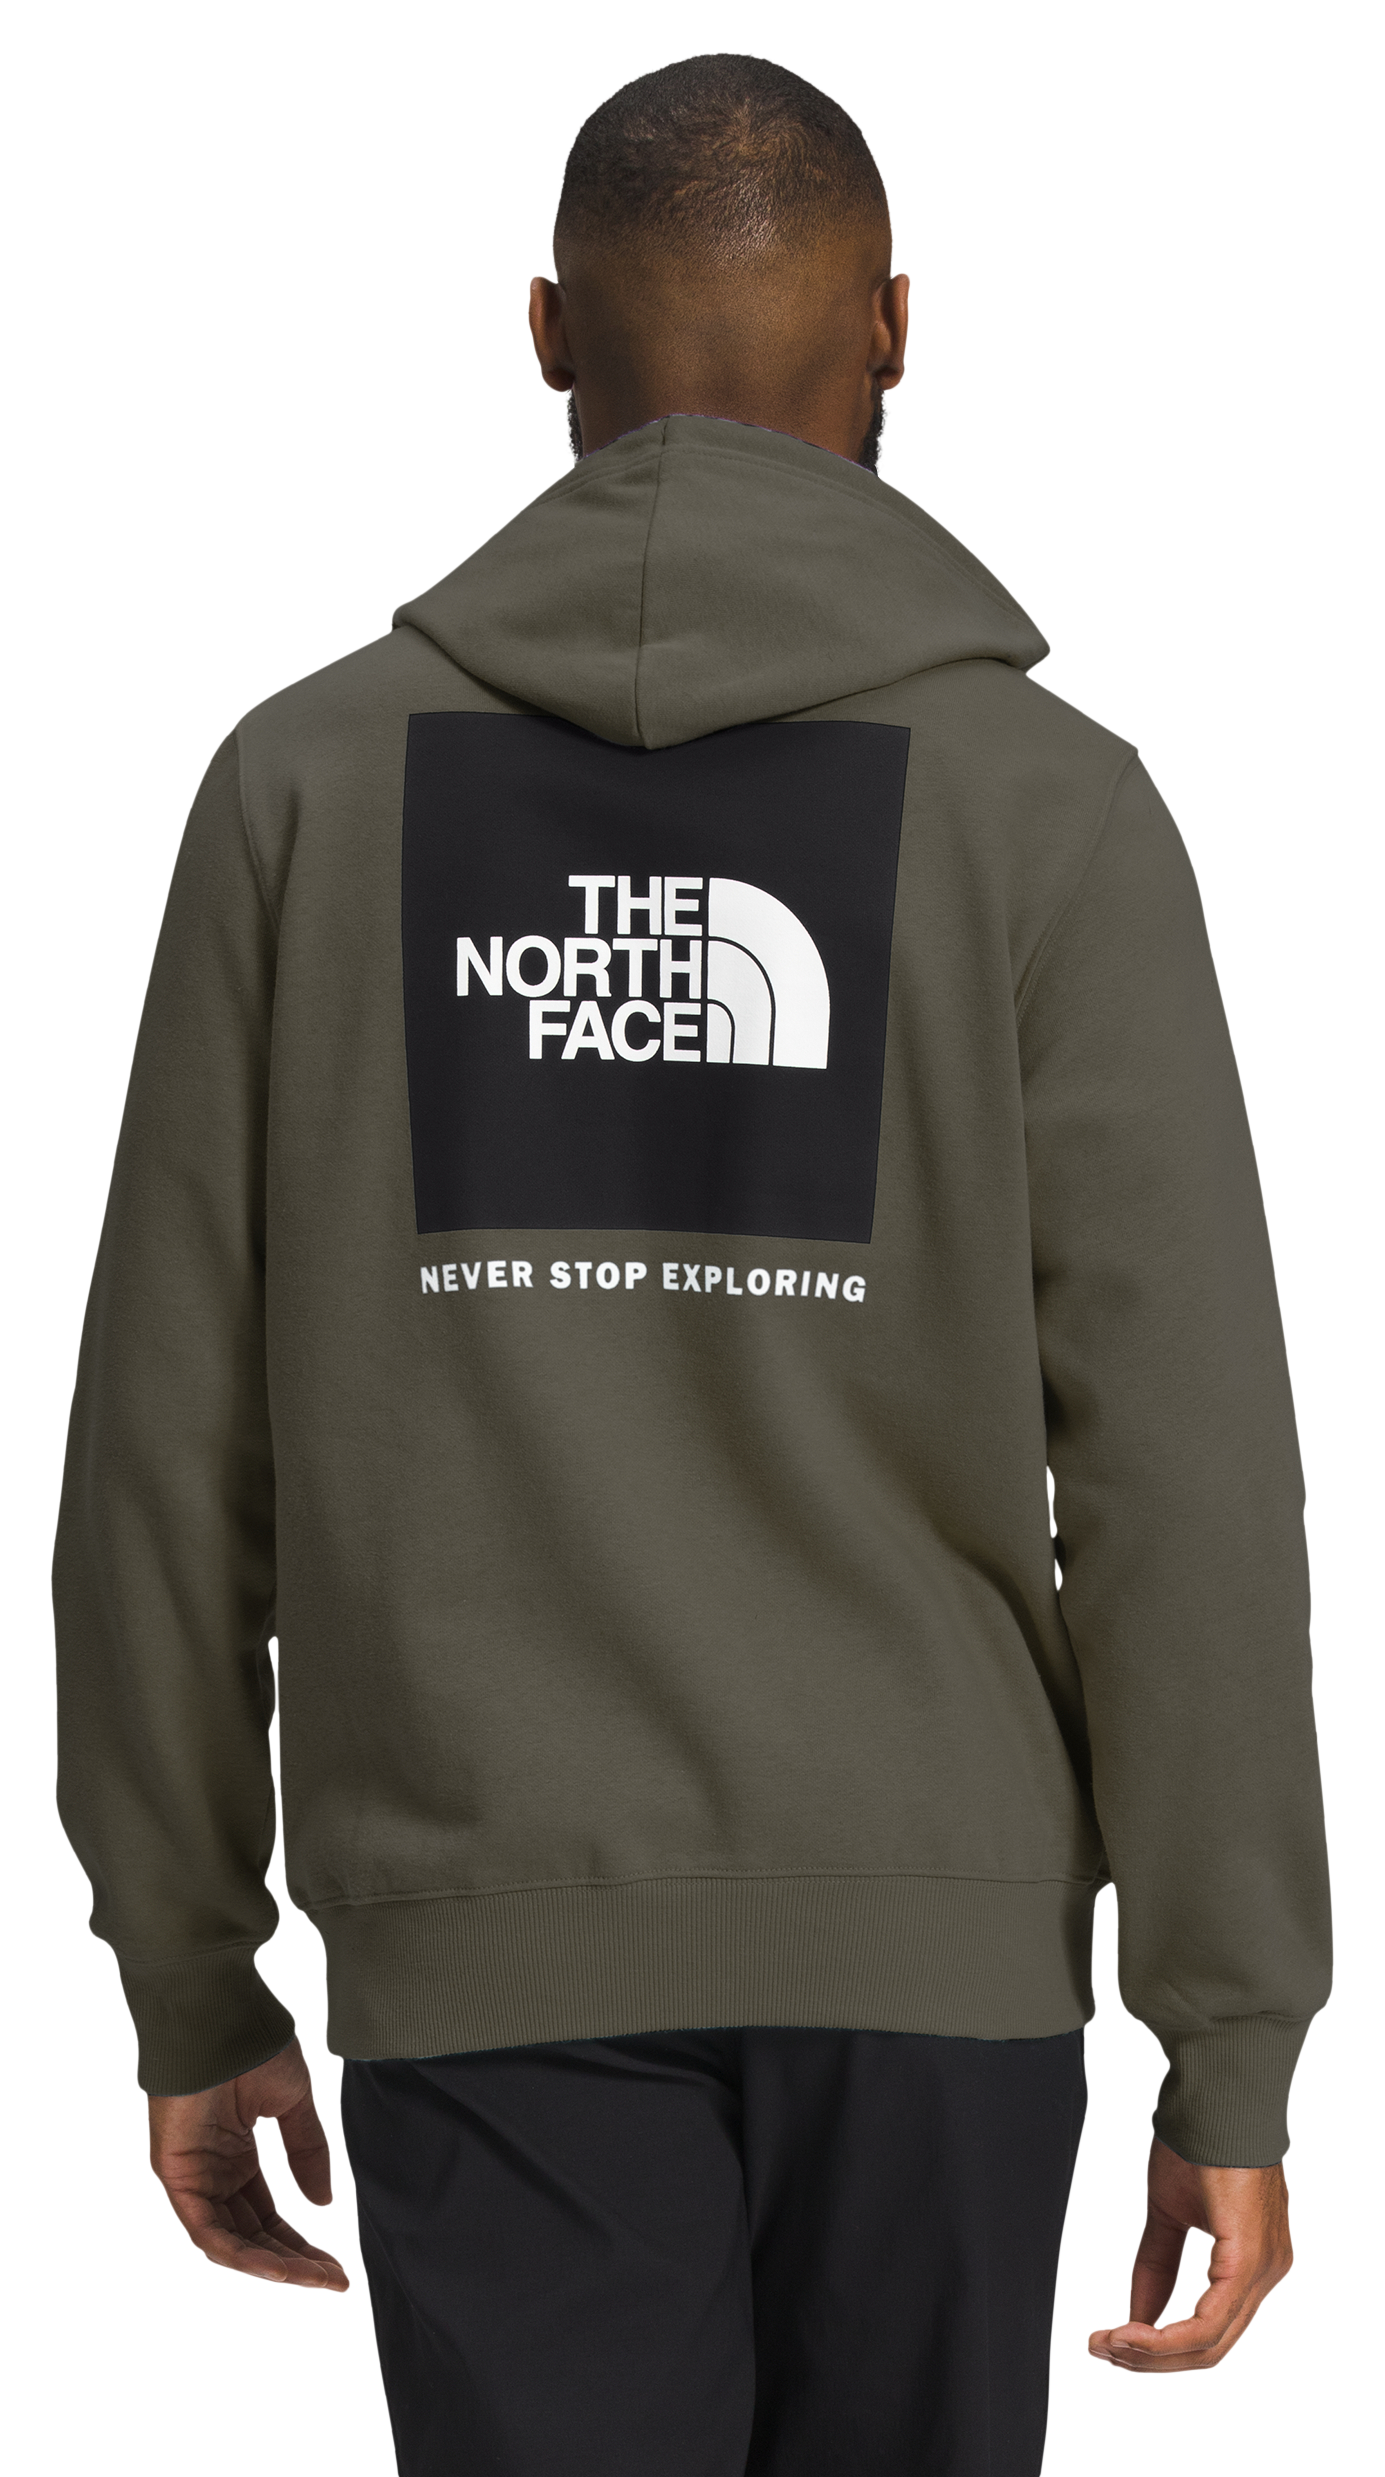 The North Face Box NSE Long-Sleeve Hoodie for Men - New Taupe Green/Black - XL